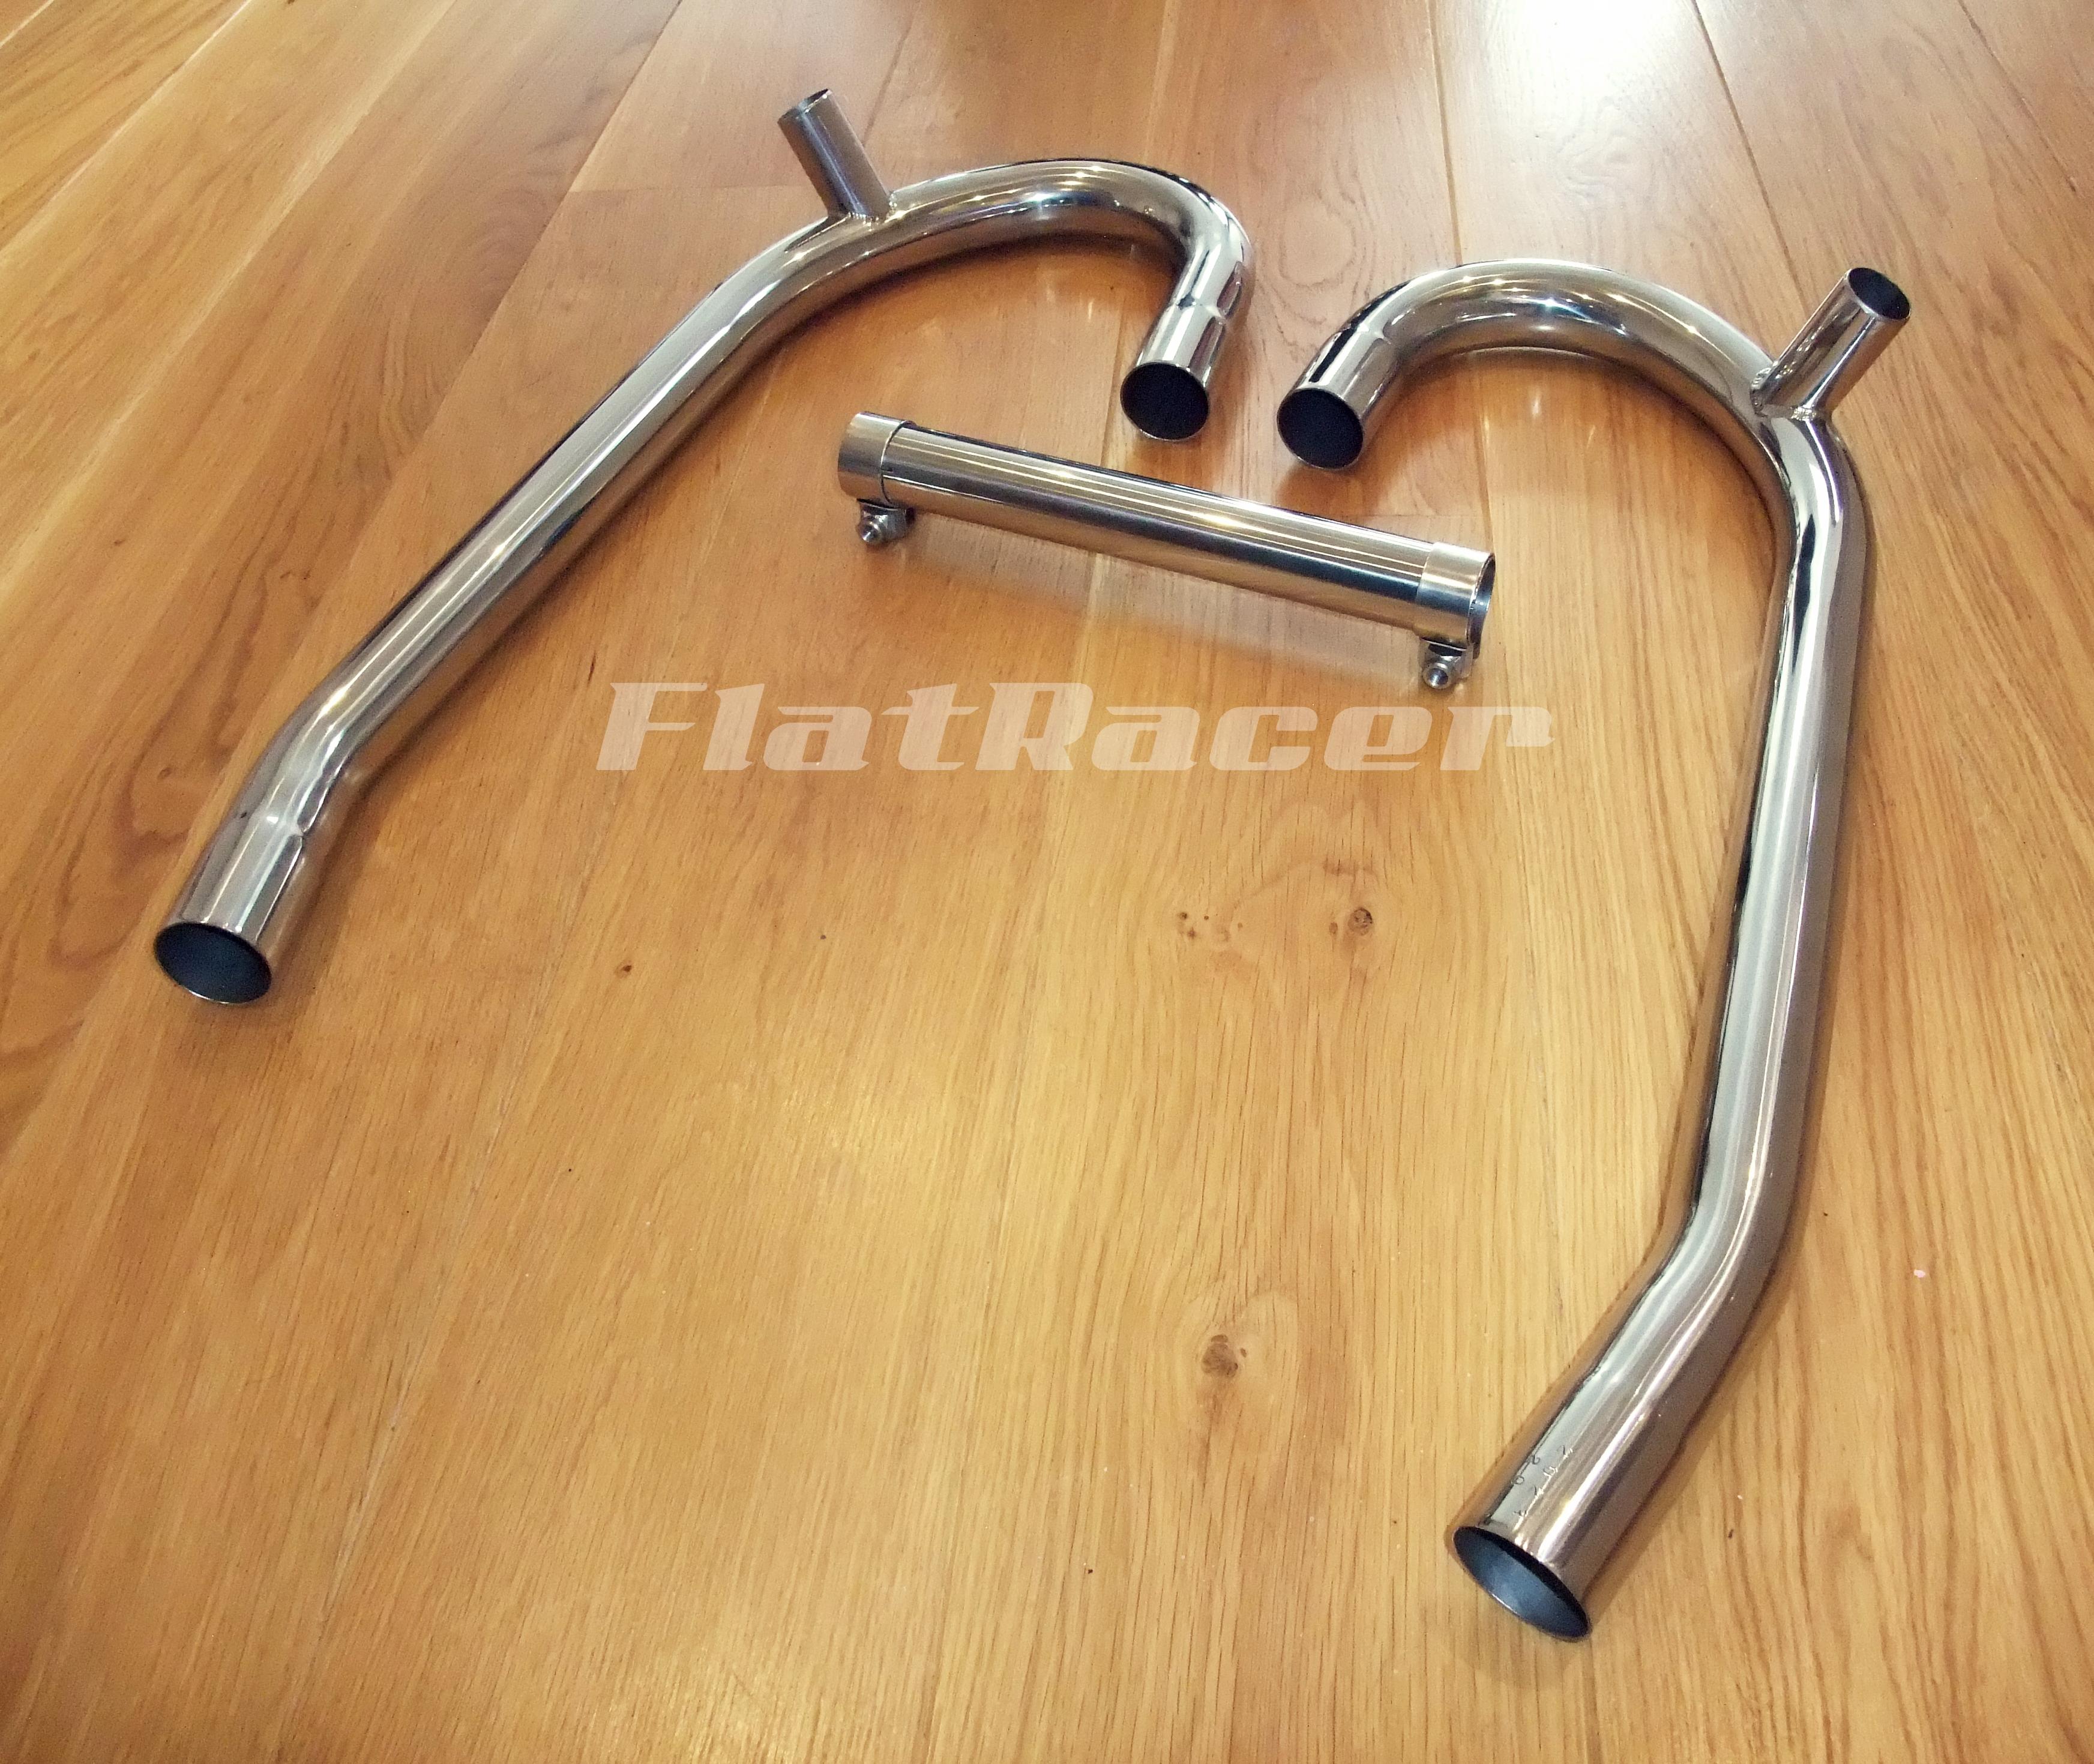 BMW R2v stainless steel exhaust manifold - single balance pipe - 40mm